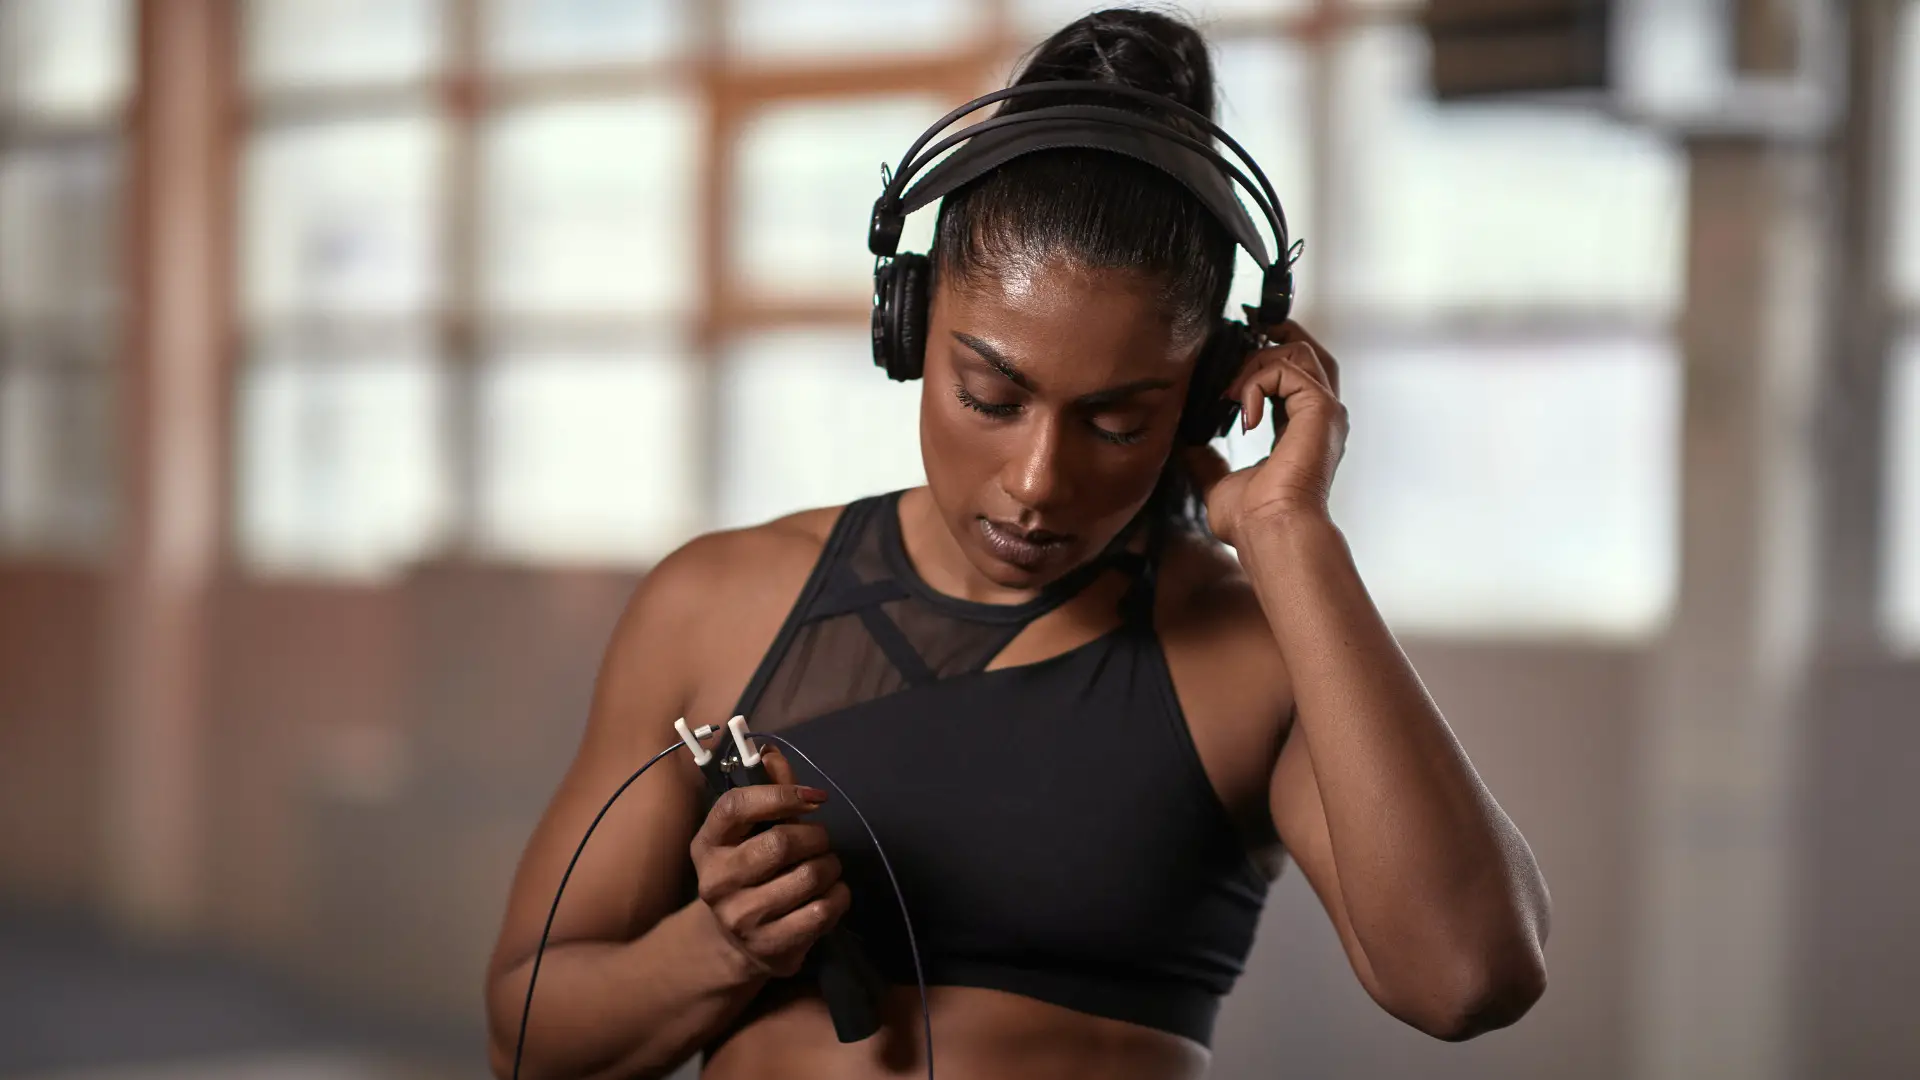 Stay in the Zone: The Best Headphones for Working Out